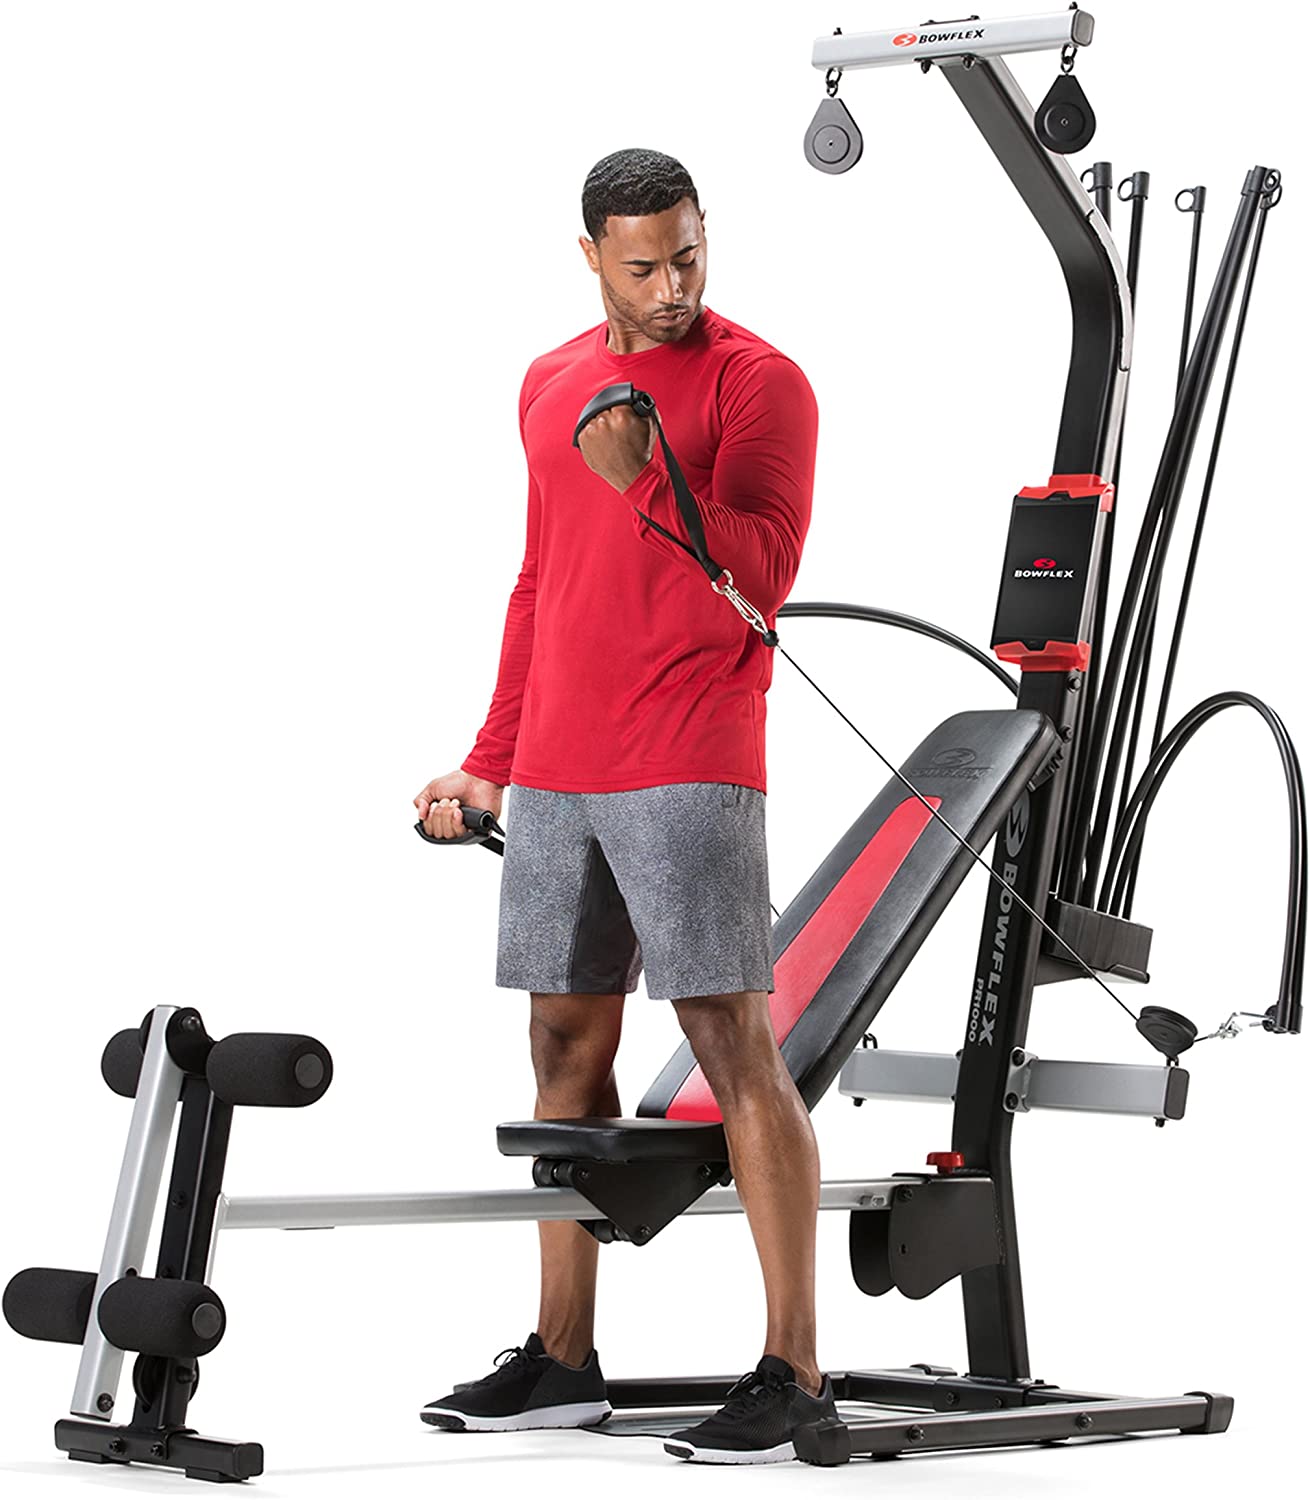 Man doing bicep exercise with Bowflex PR1000 Home Gym